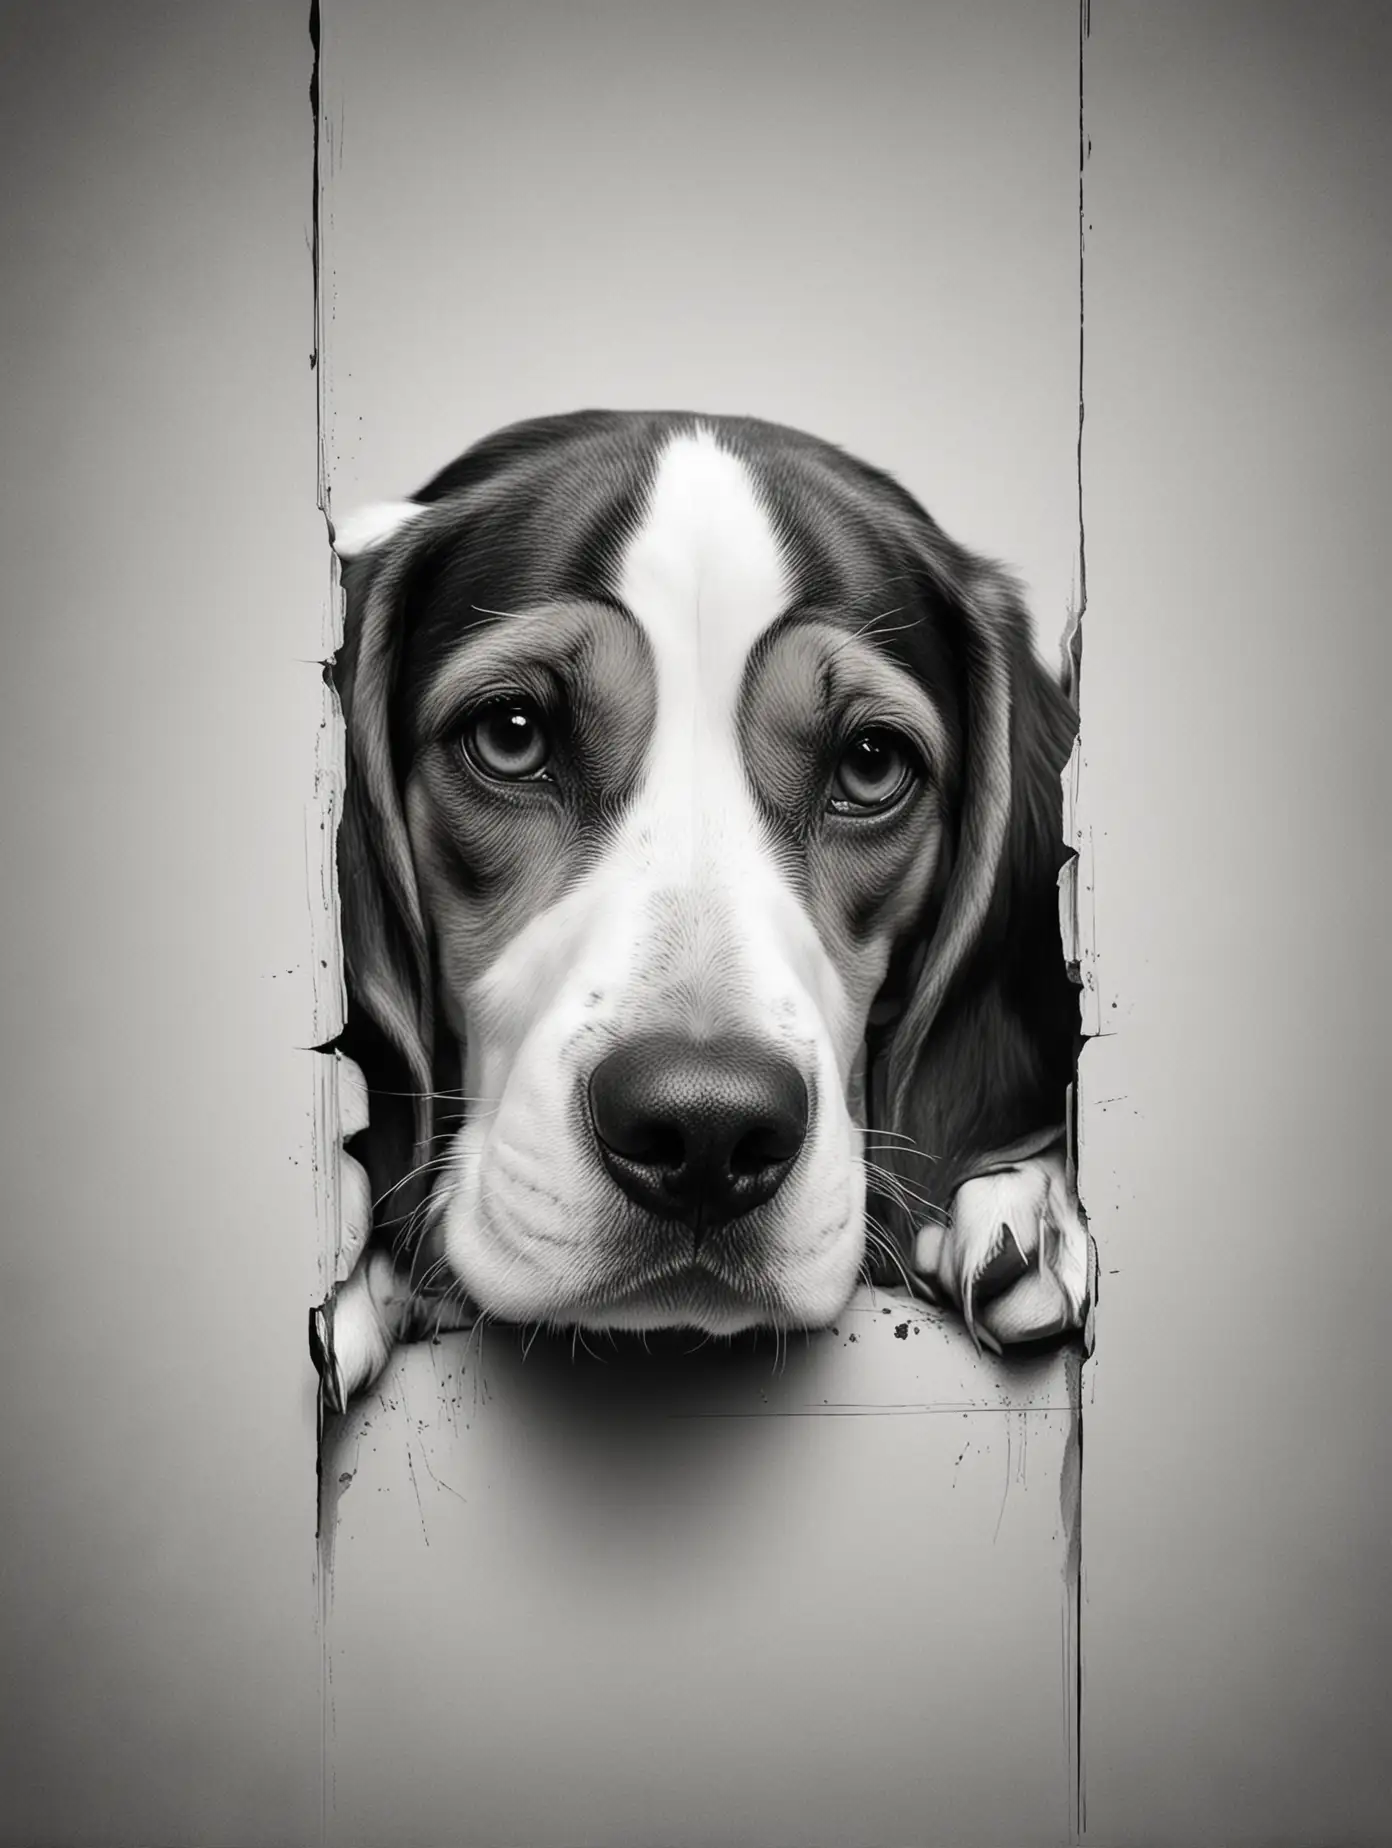 a black and white illustration of a beagle dog’s head and front paws resting over a horizontal line, giving the impression that the dog is peeking over a surface. The stylized artwork features bold lines and contrasting areas of black and white, creating an interesting visual effect. The dog appears to be a breed with pointed ears.